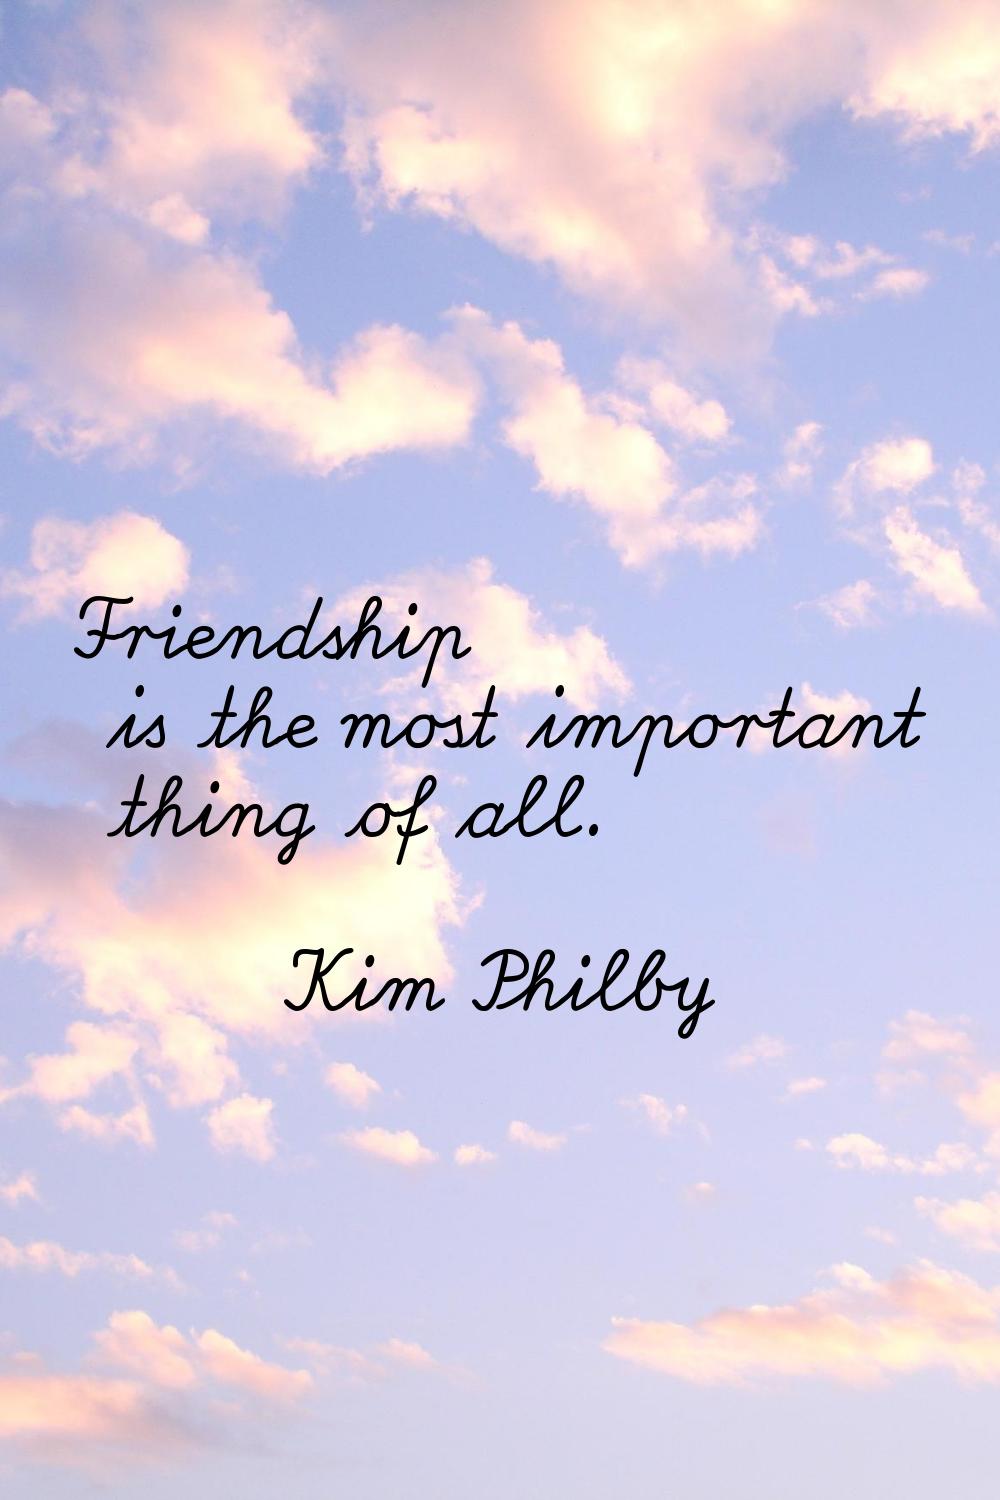 Friendship is the most important thing of all.